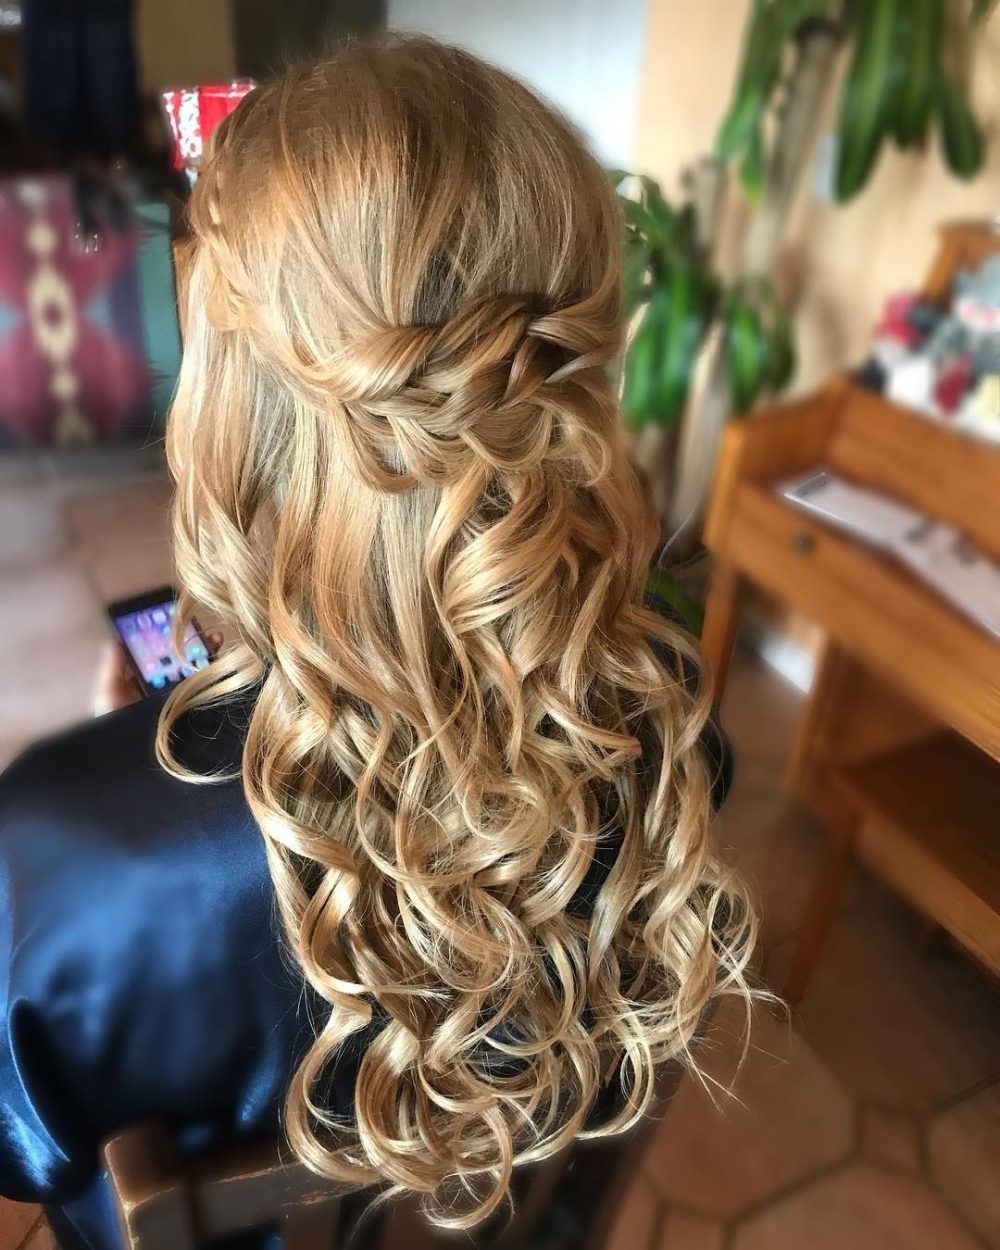 Best And Newest Wedding Hairstyles For Extremely Long Hair Inside Wedding Hairstyles For Long Hair: 24 Creative & Unique Wedding Styles (View 2 of 15)